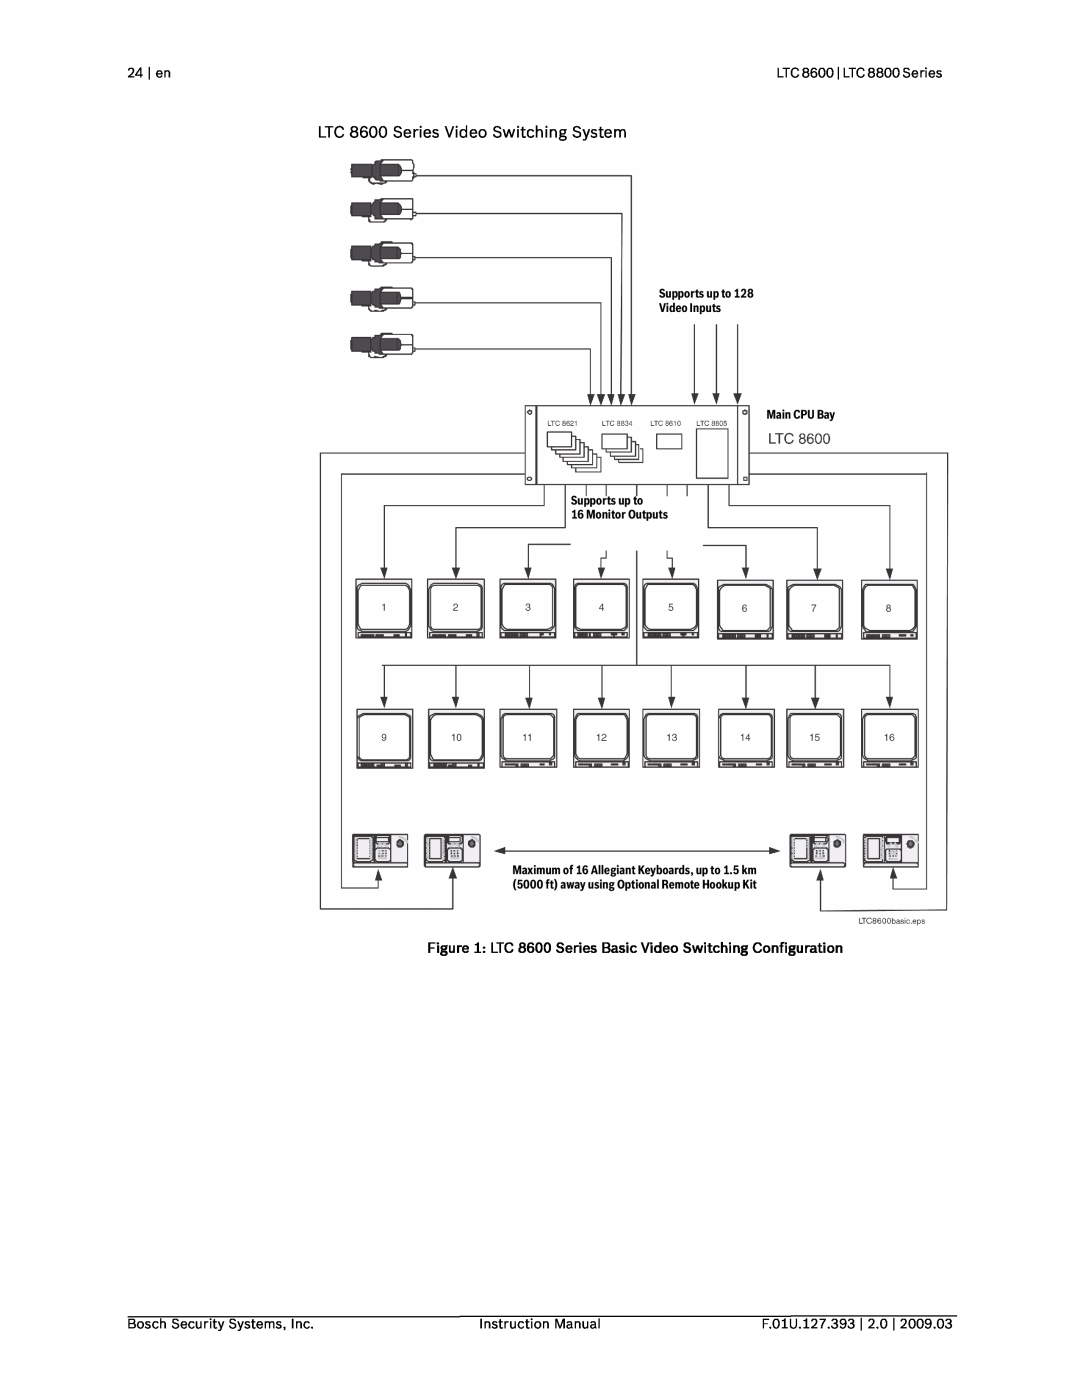 Bosch Appliances LTC 8600 Series Video Switching System, 24 | en, Bosch Security Systems, Inc, Instruction Manual 